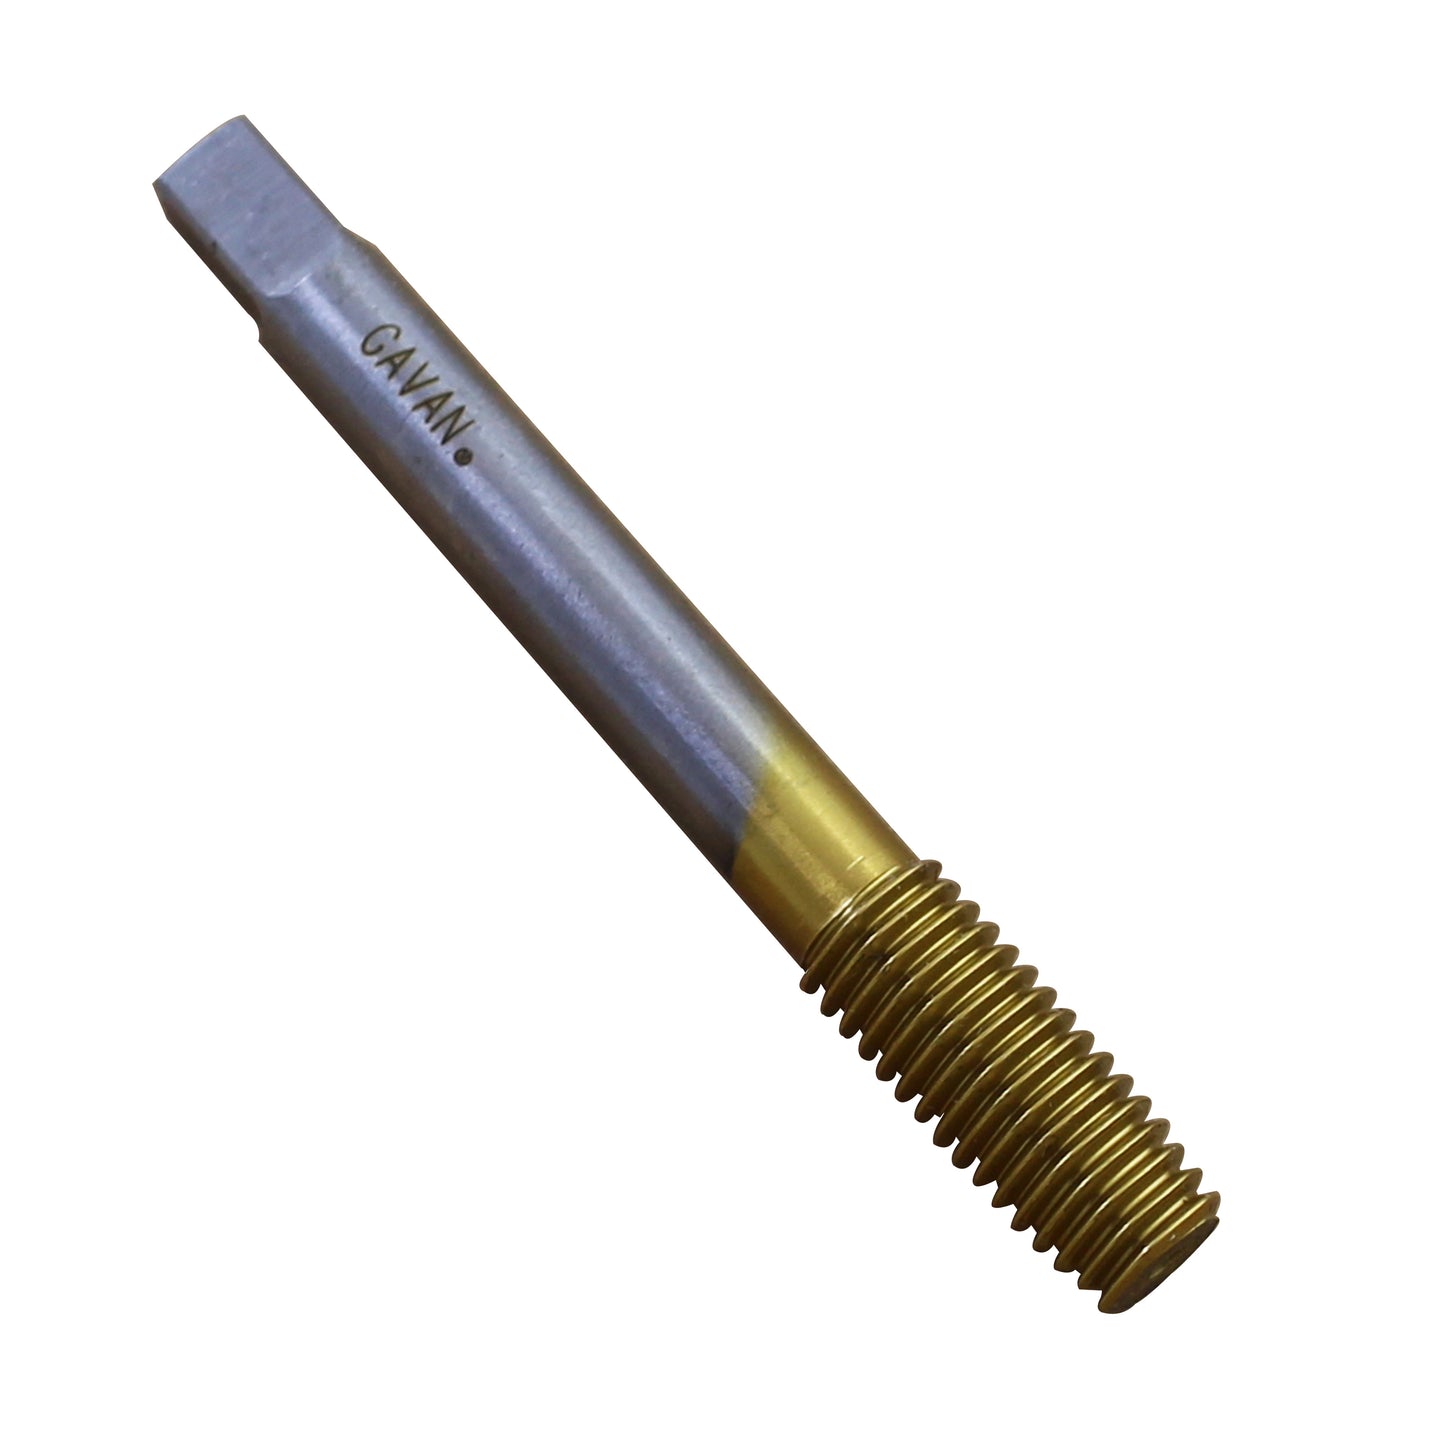 M10 x 1.5 HSS Left hand Thread Forming Tap